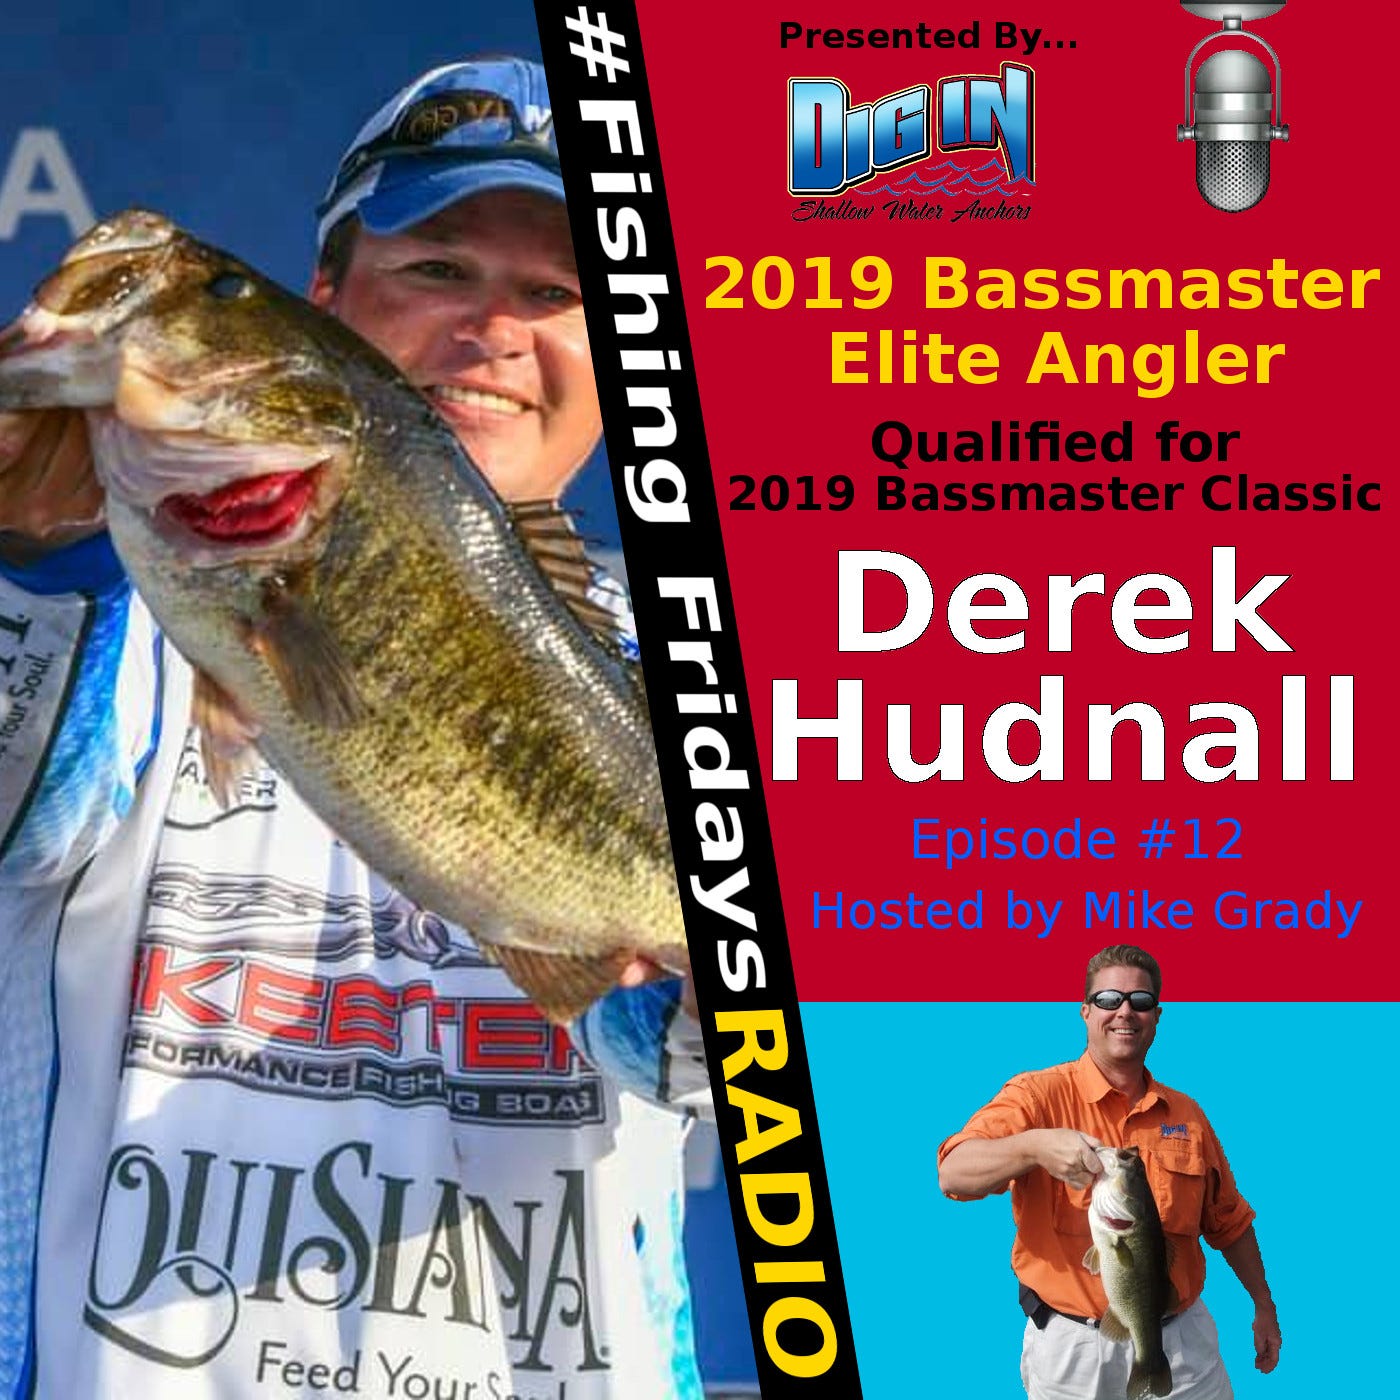 Fishing Fridays Radio Interviews Derek Hudnall, Qualified for 2019  Bassmaster Classic, by Dig In Anchors